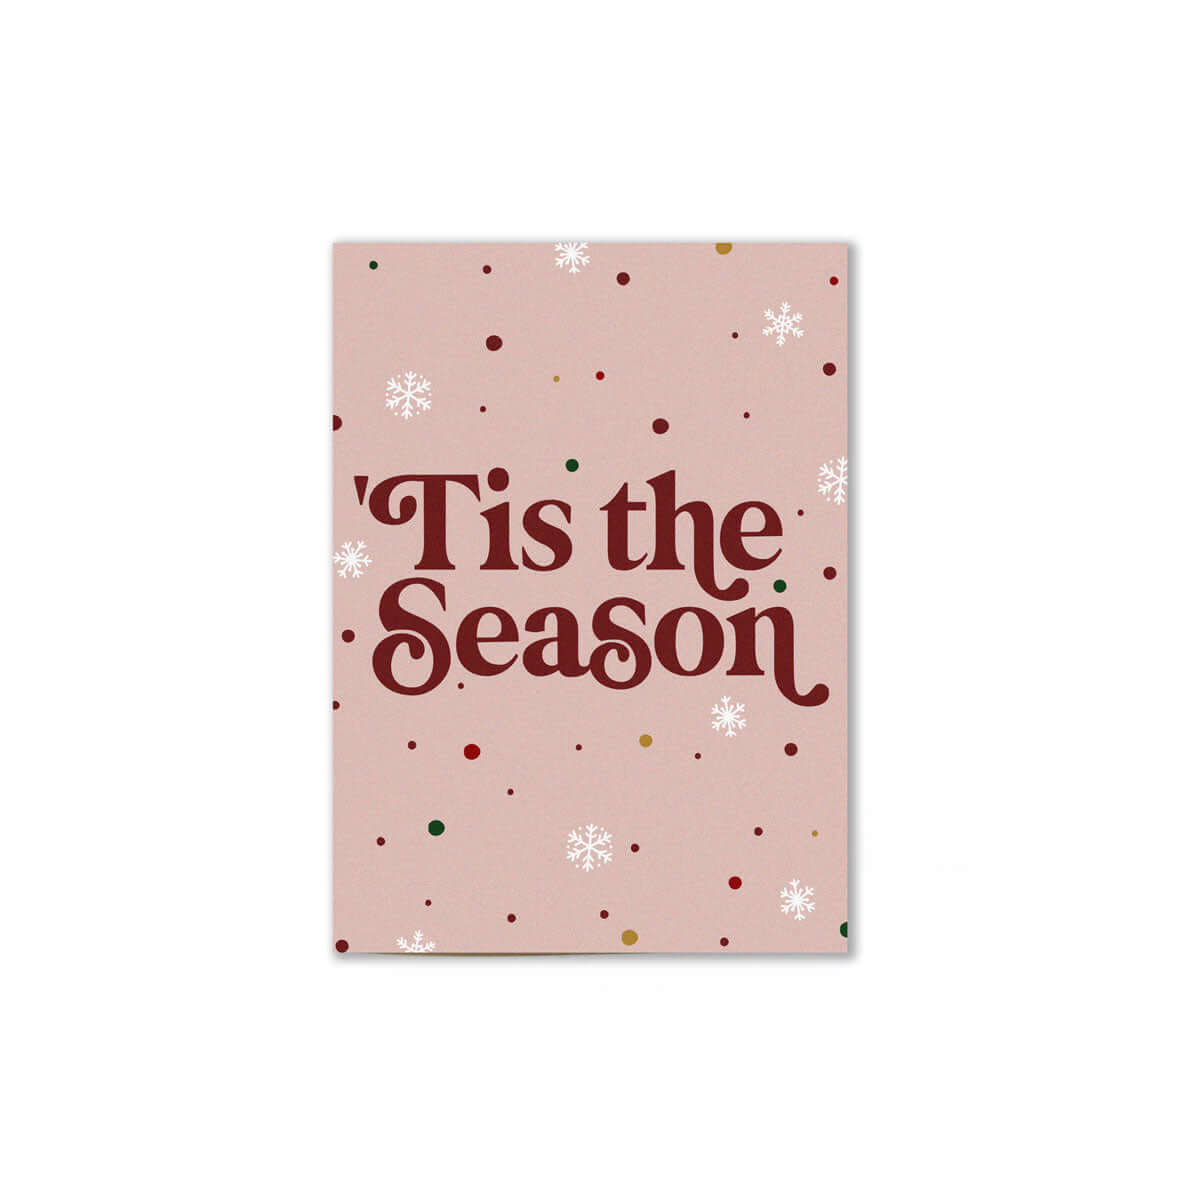 red themed Tis the season holiday card that reads "Tis the season" in festive red letters with festive snowflake and particle decorations in the background